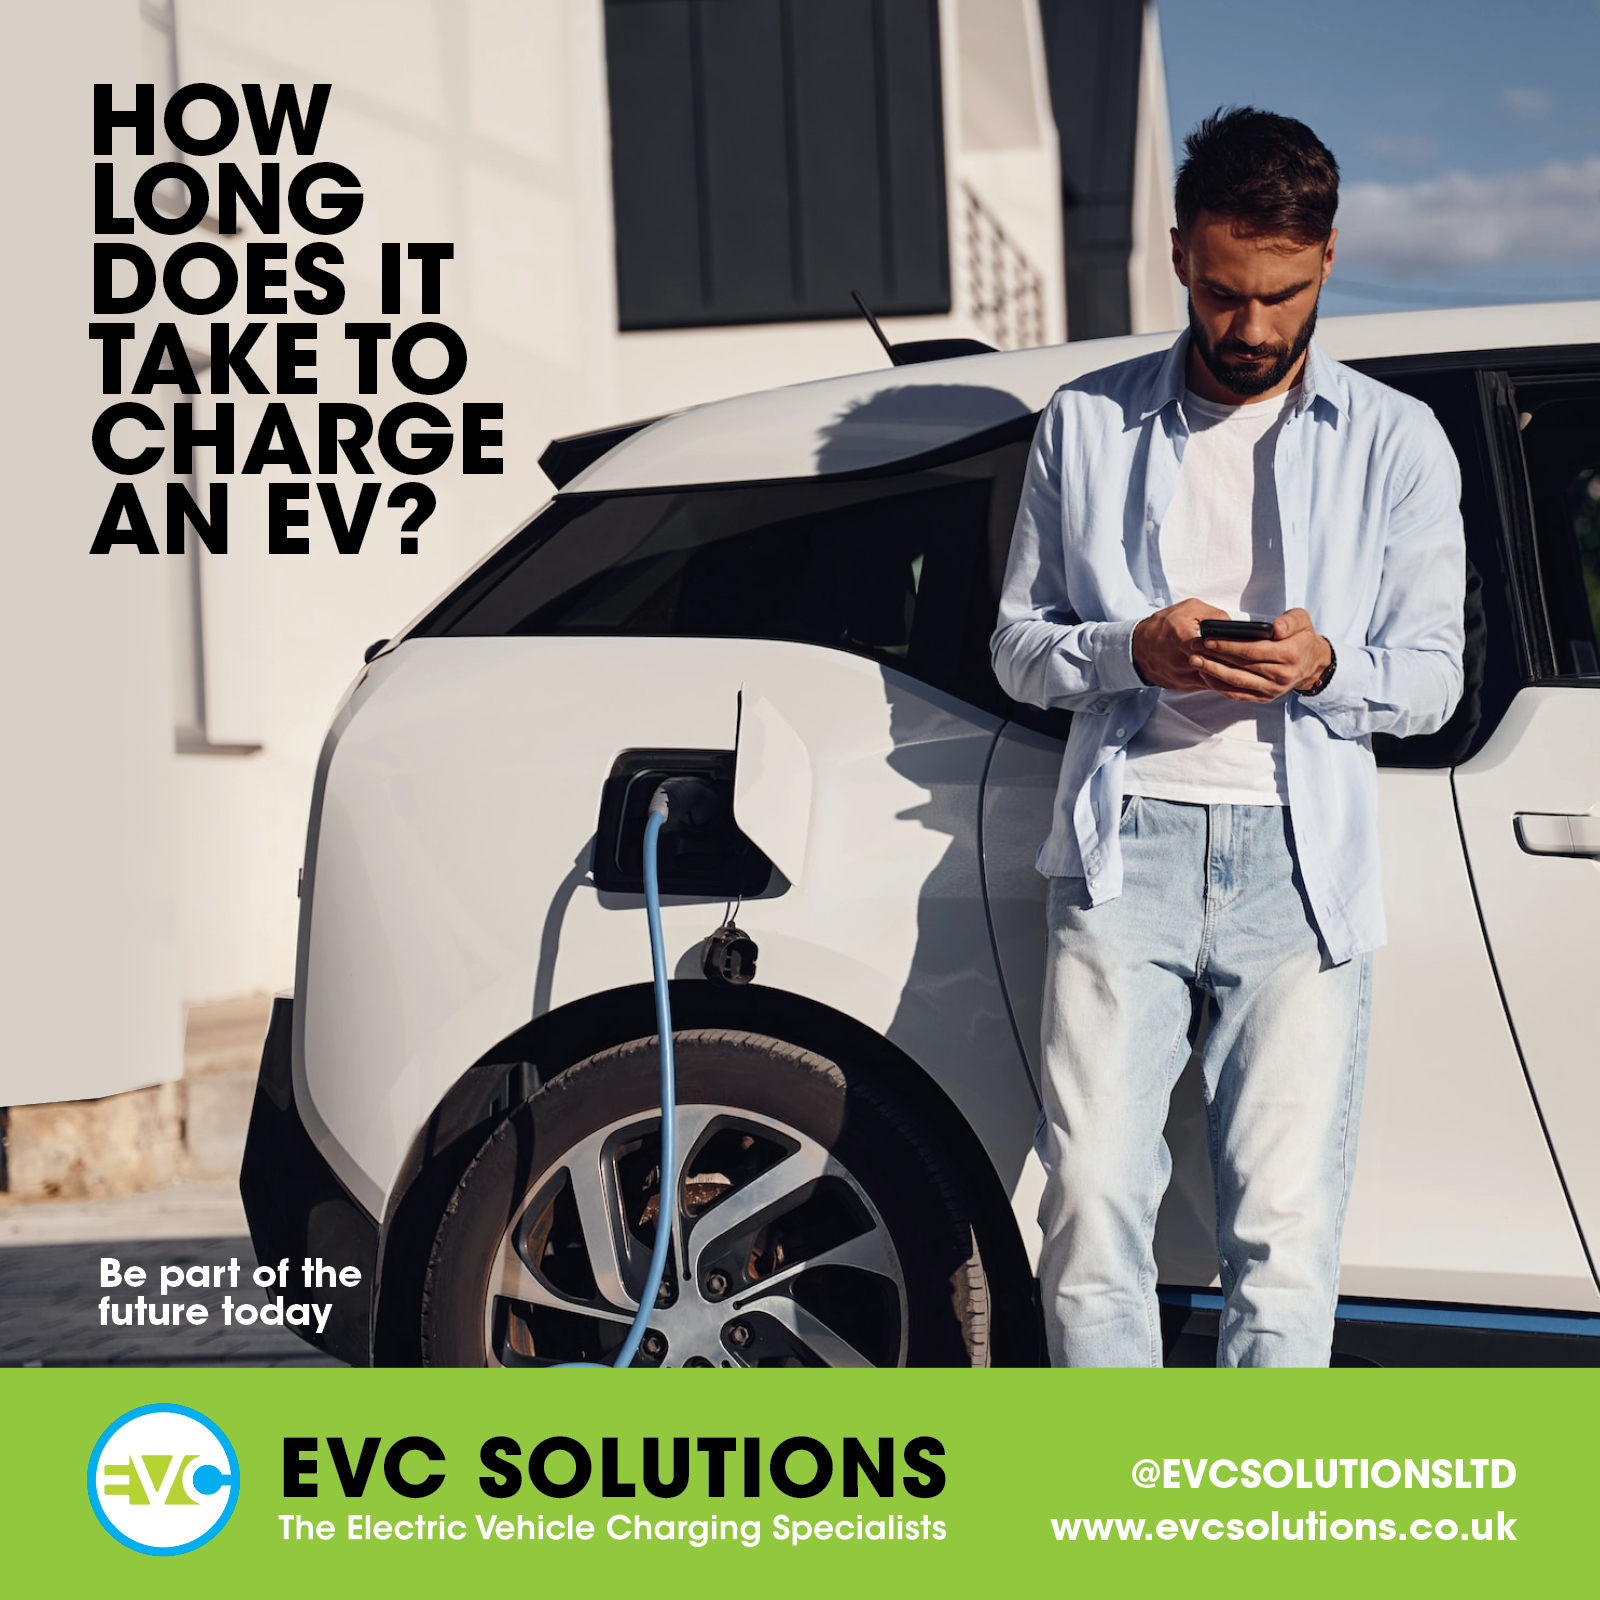 How Long Does It Take To Charge an EV Social Media Post for EVC Solutions